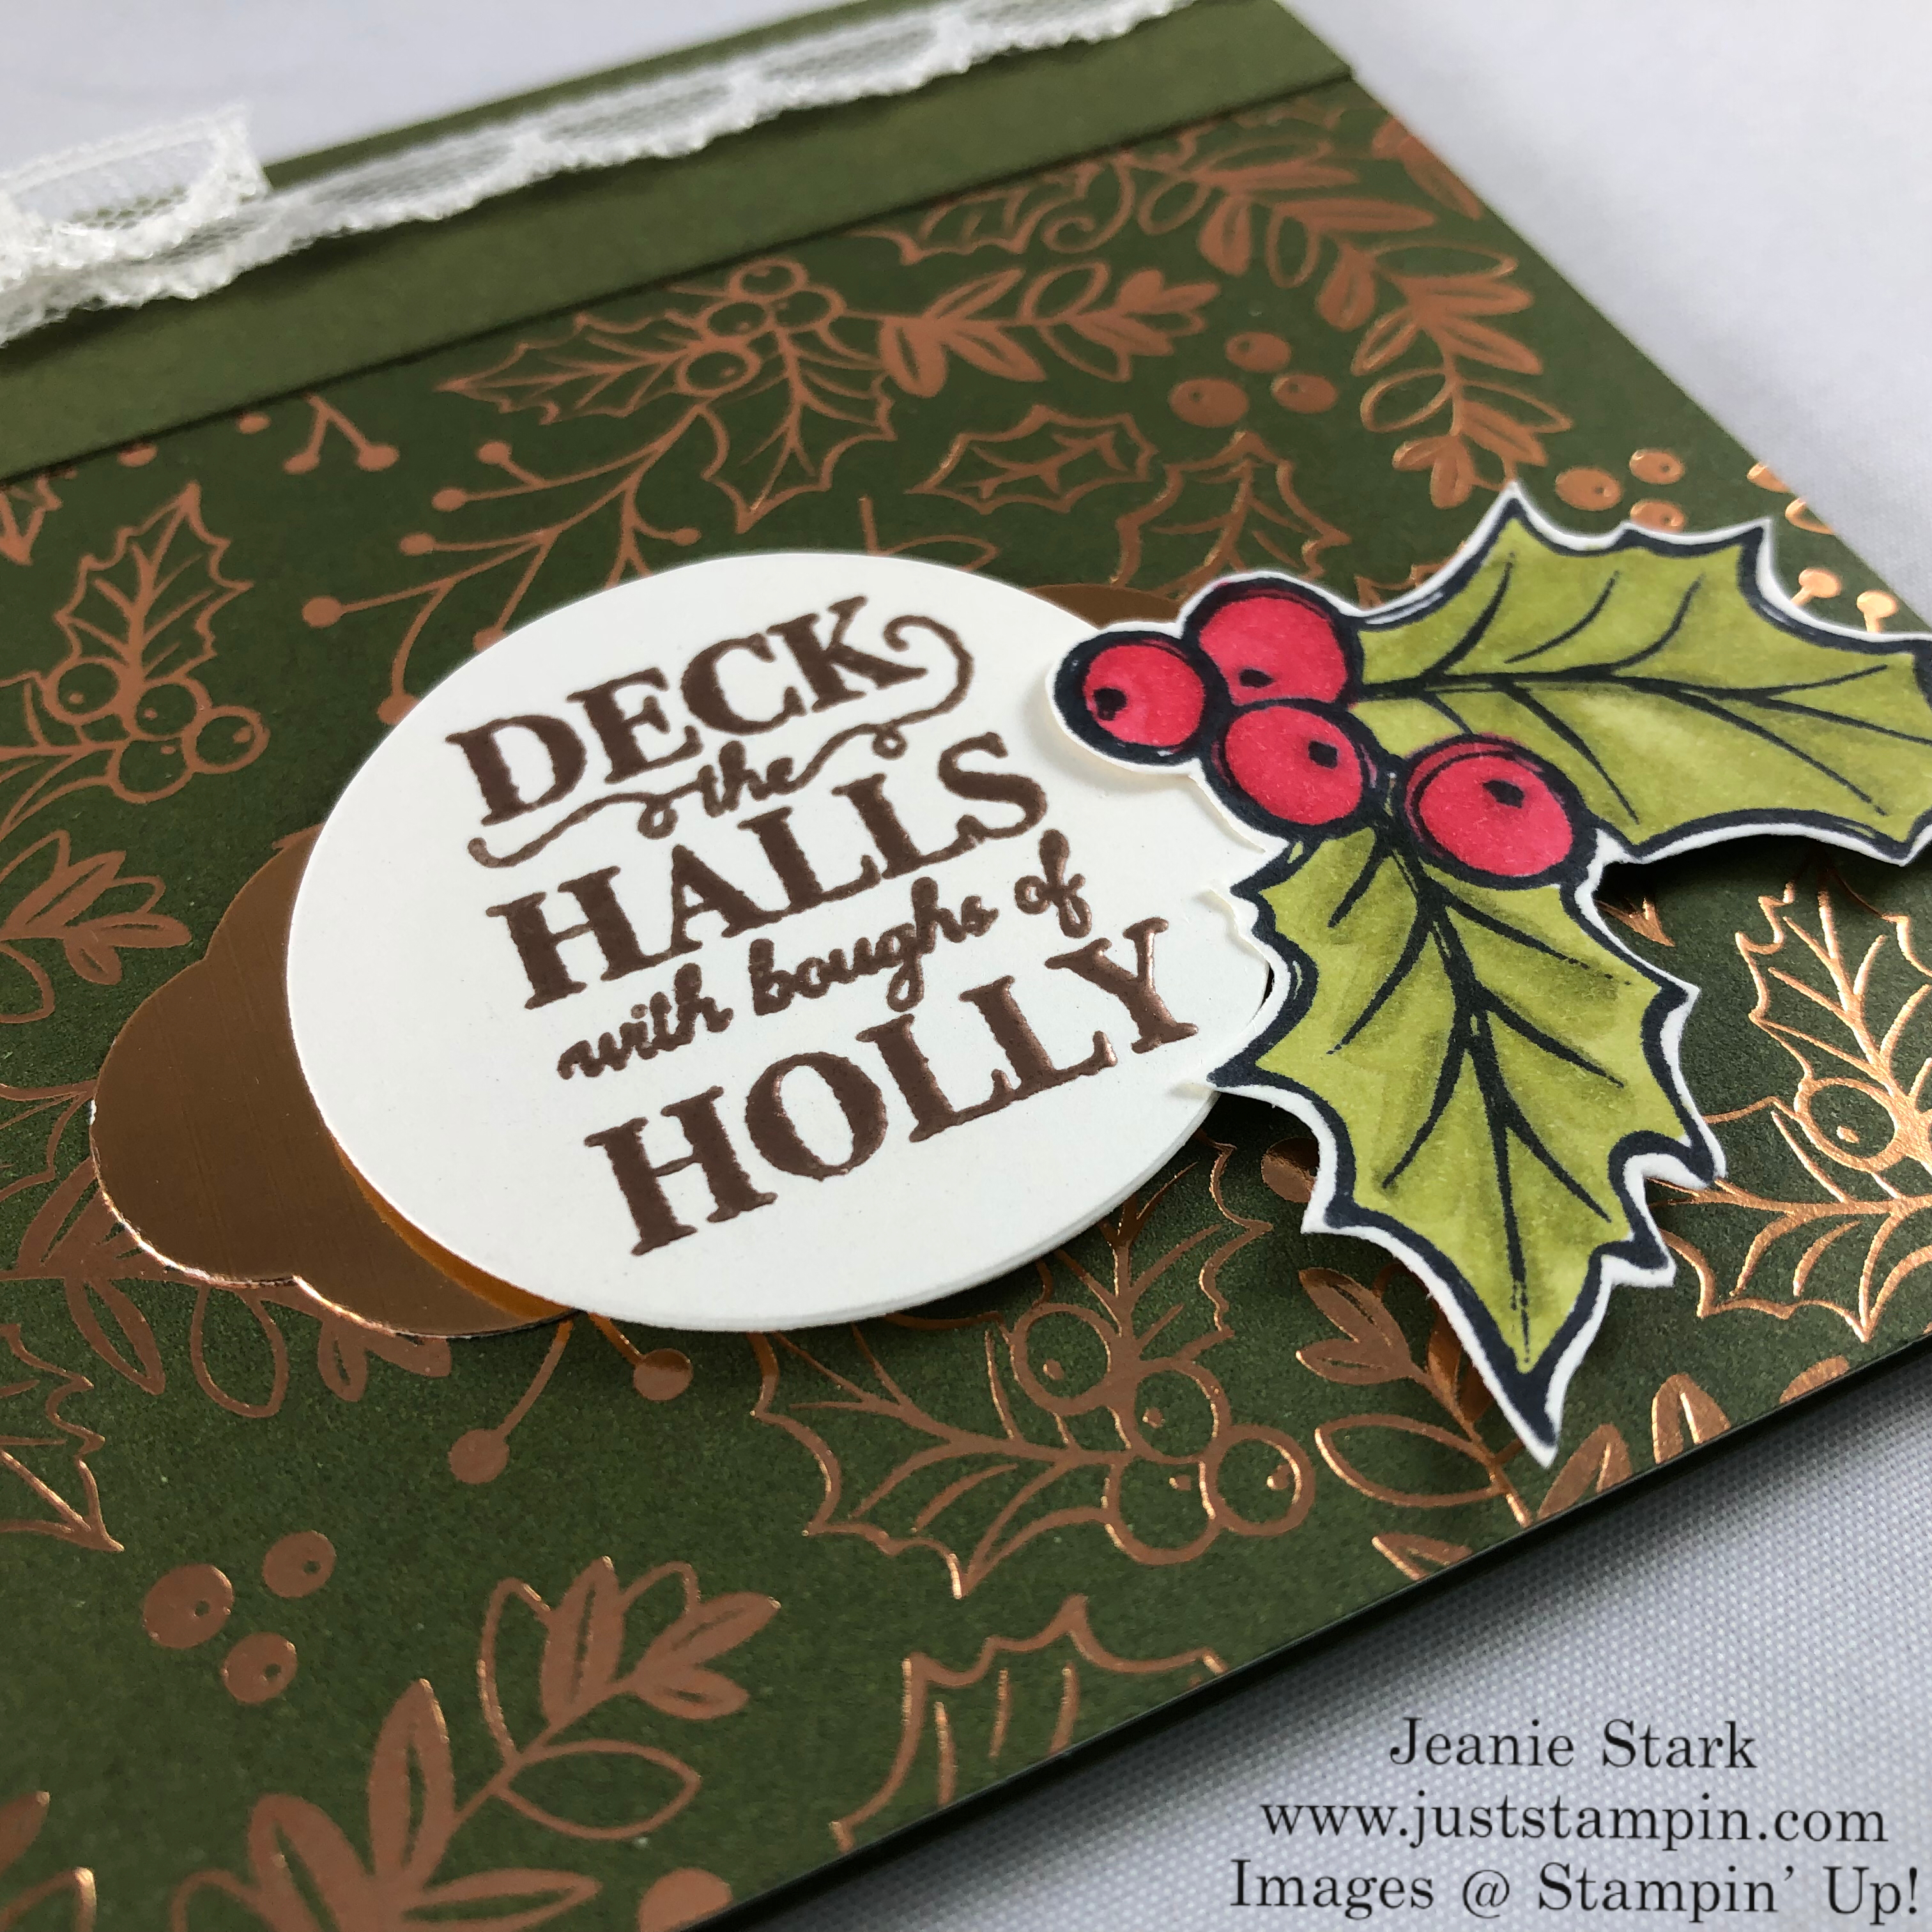 Stampin' Up! Christmas Gleaming Stamp Set and Brightly Gleaming Specialty Designer Series quick & easy Christmas card idea - Jeanie Stark StampinUp